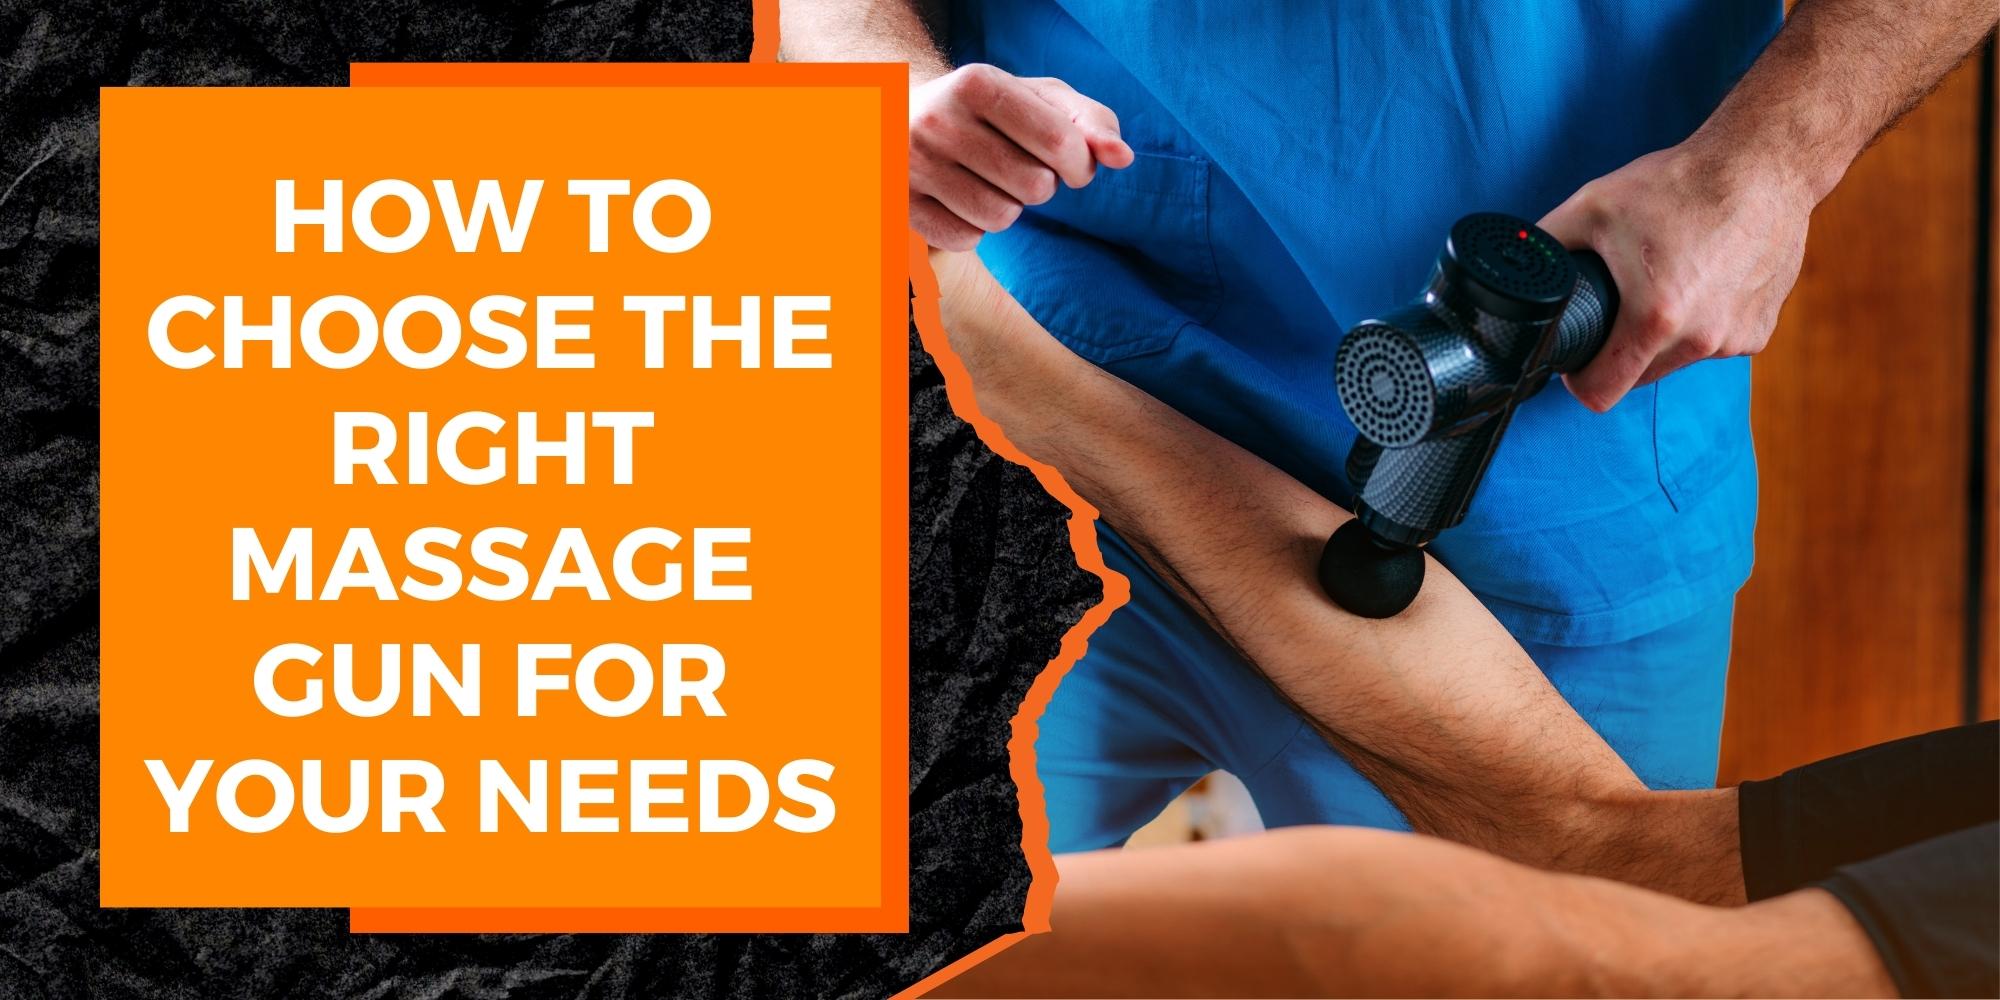 How to Choose the Right Massage Gun for Your Needs